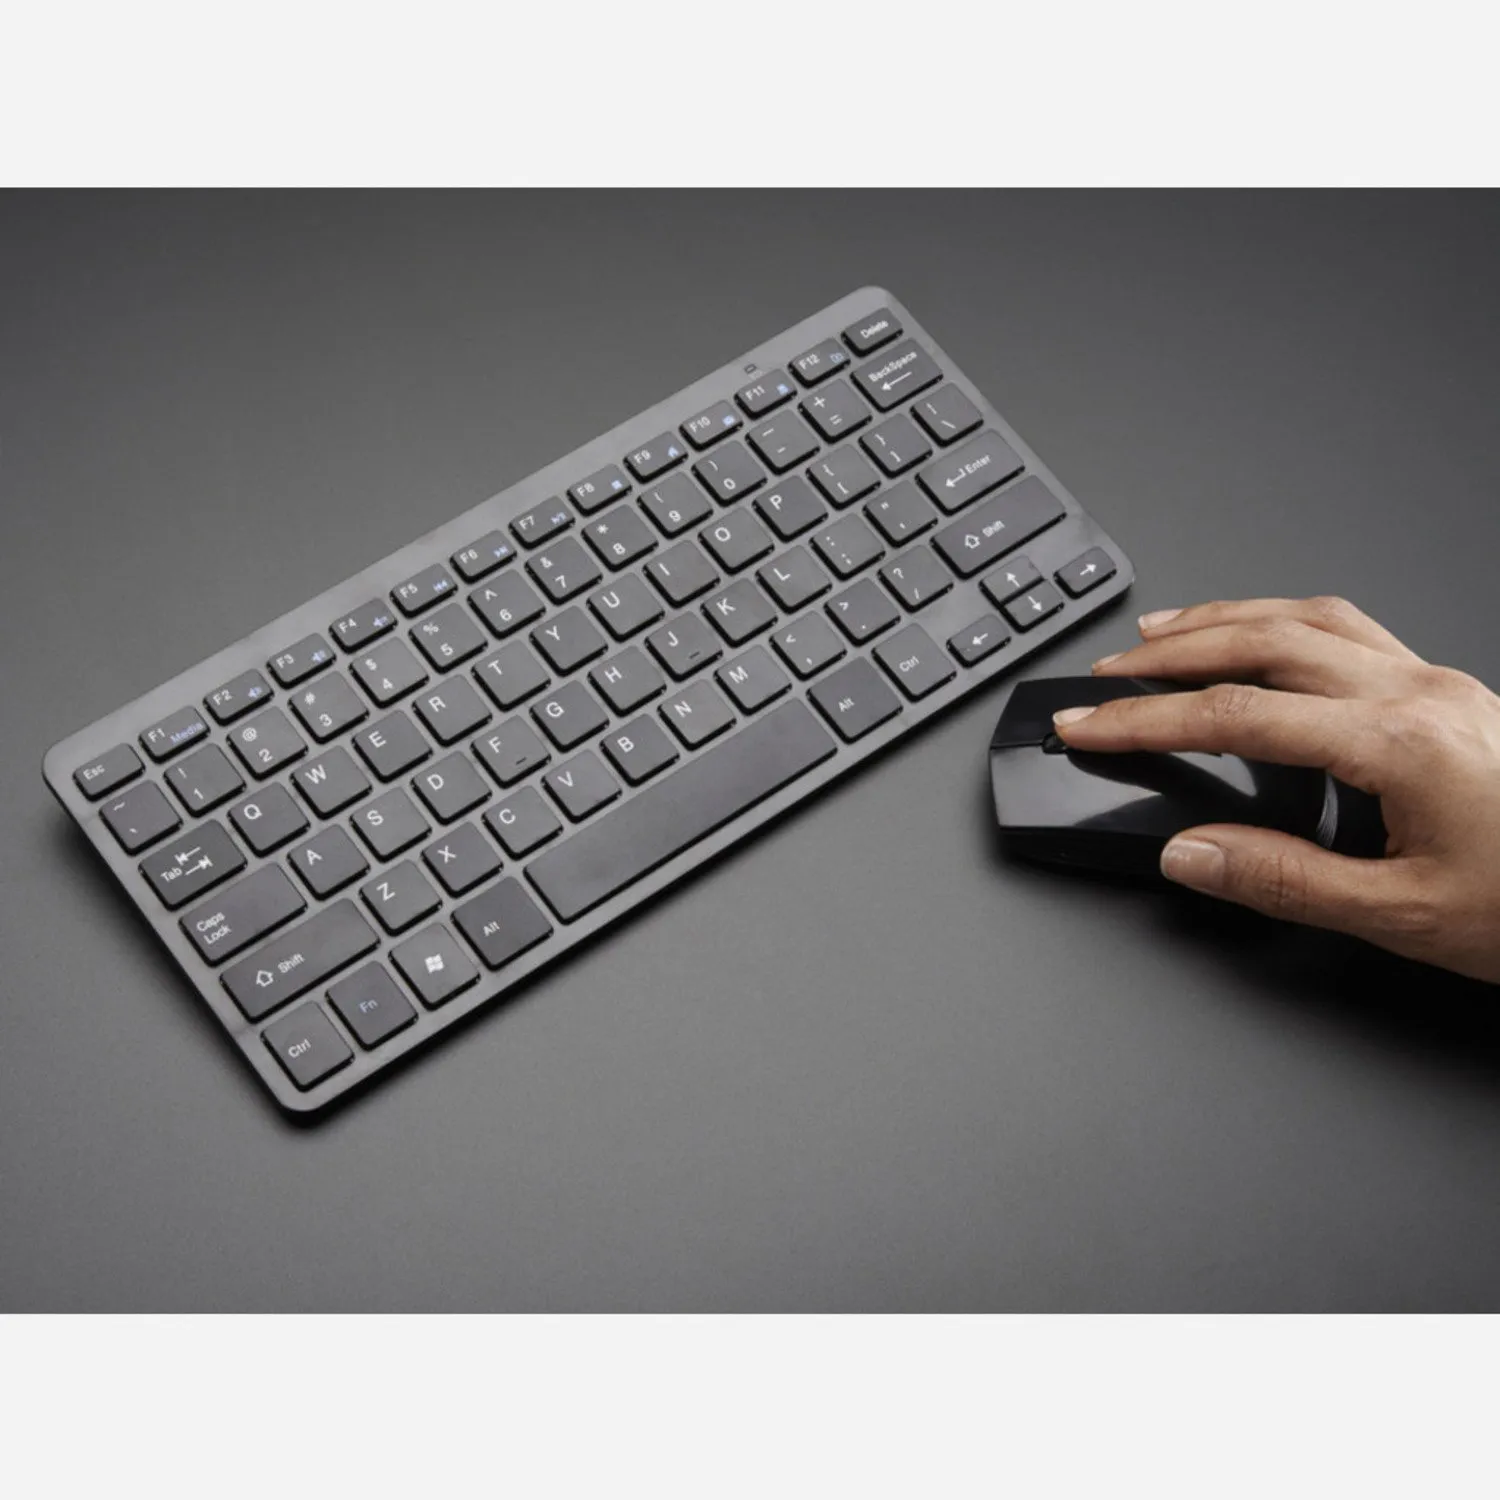 Photo of Wireless Keyboard and Mouse Combo w/ Batteries - One USB Port!